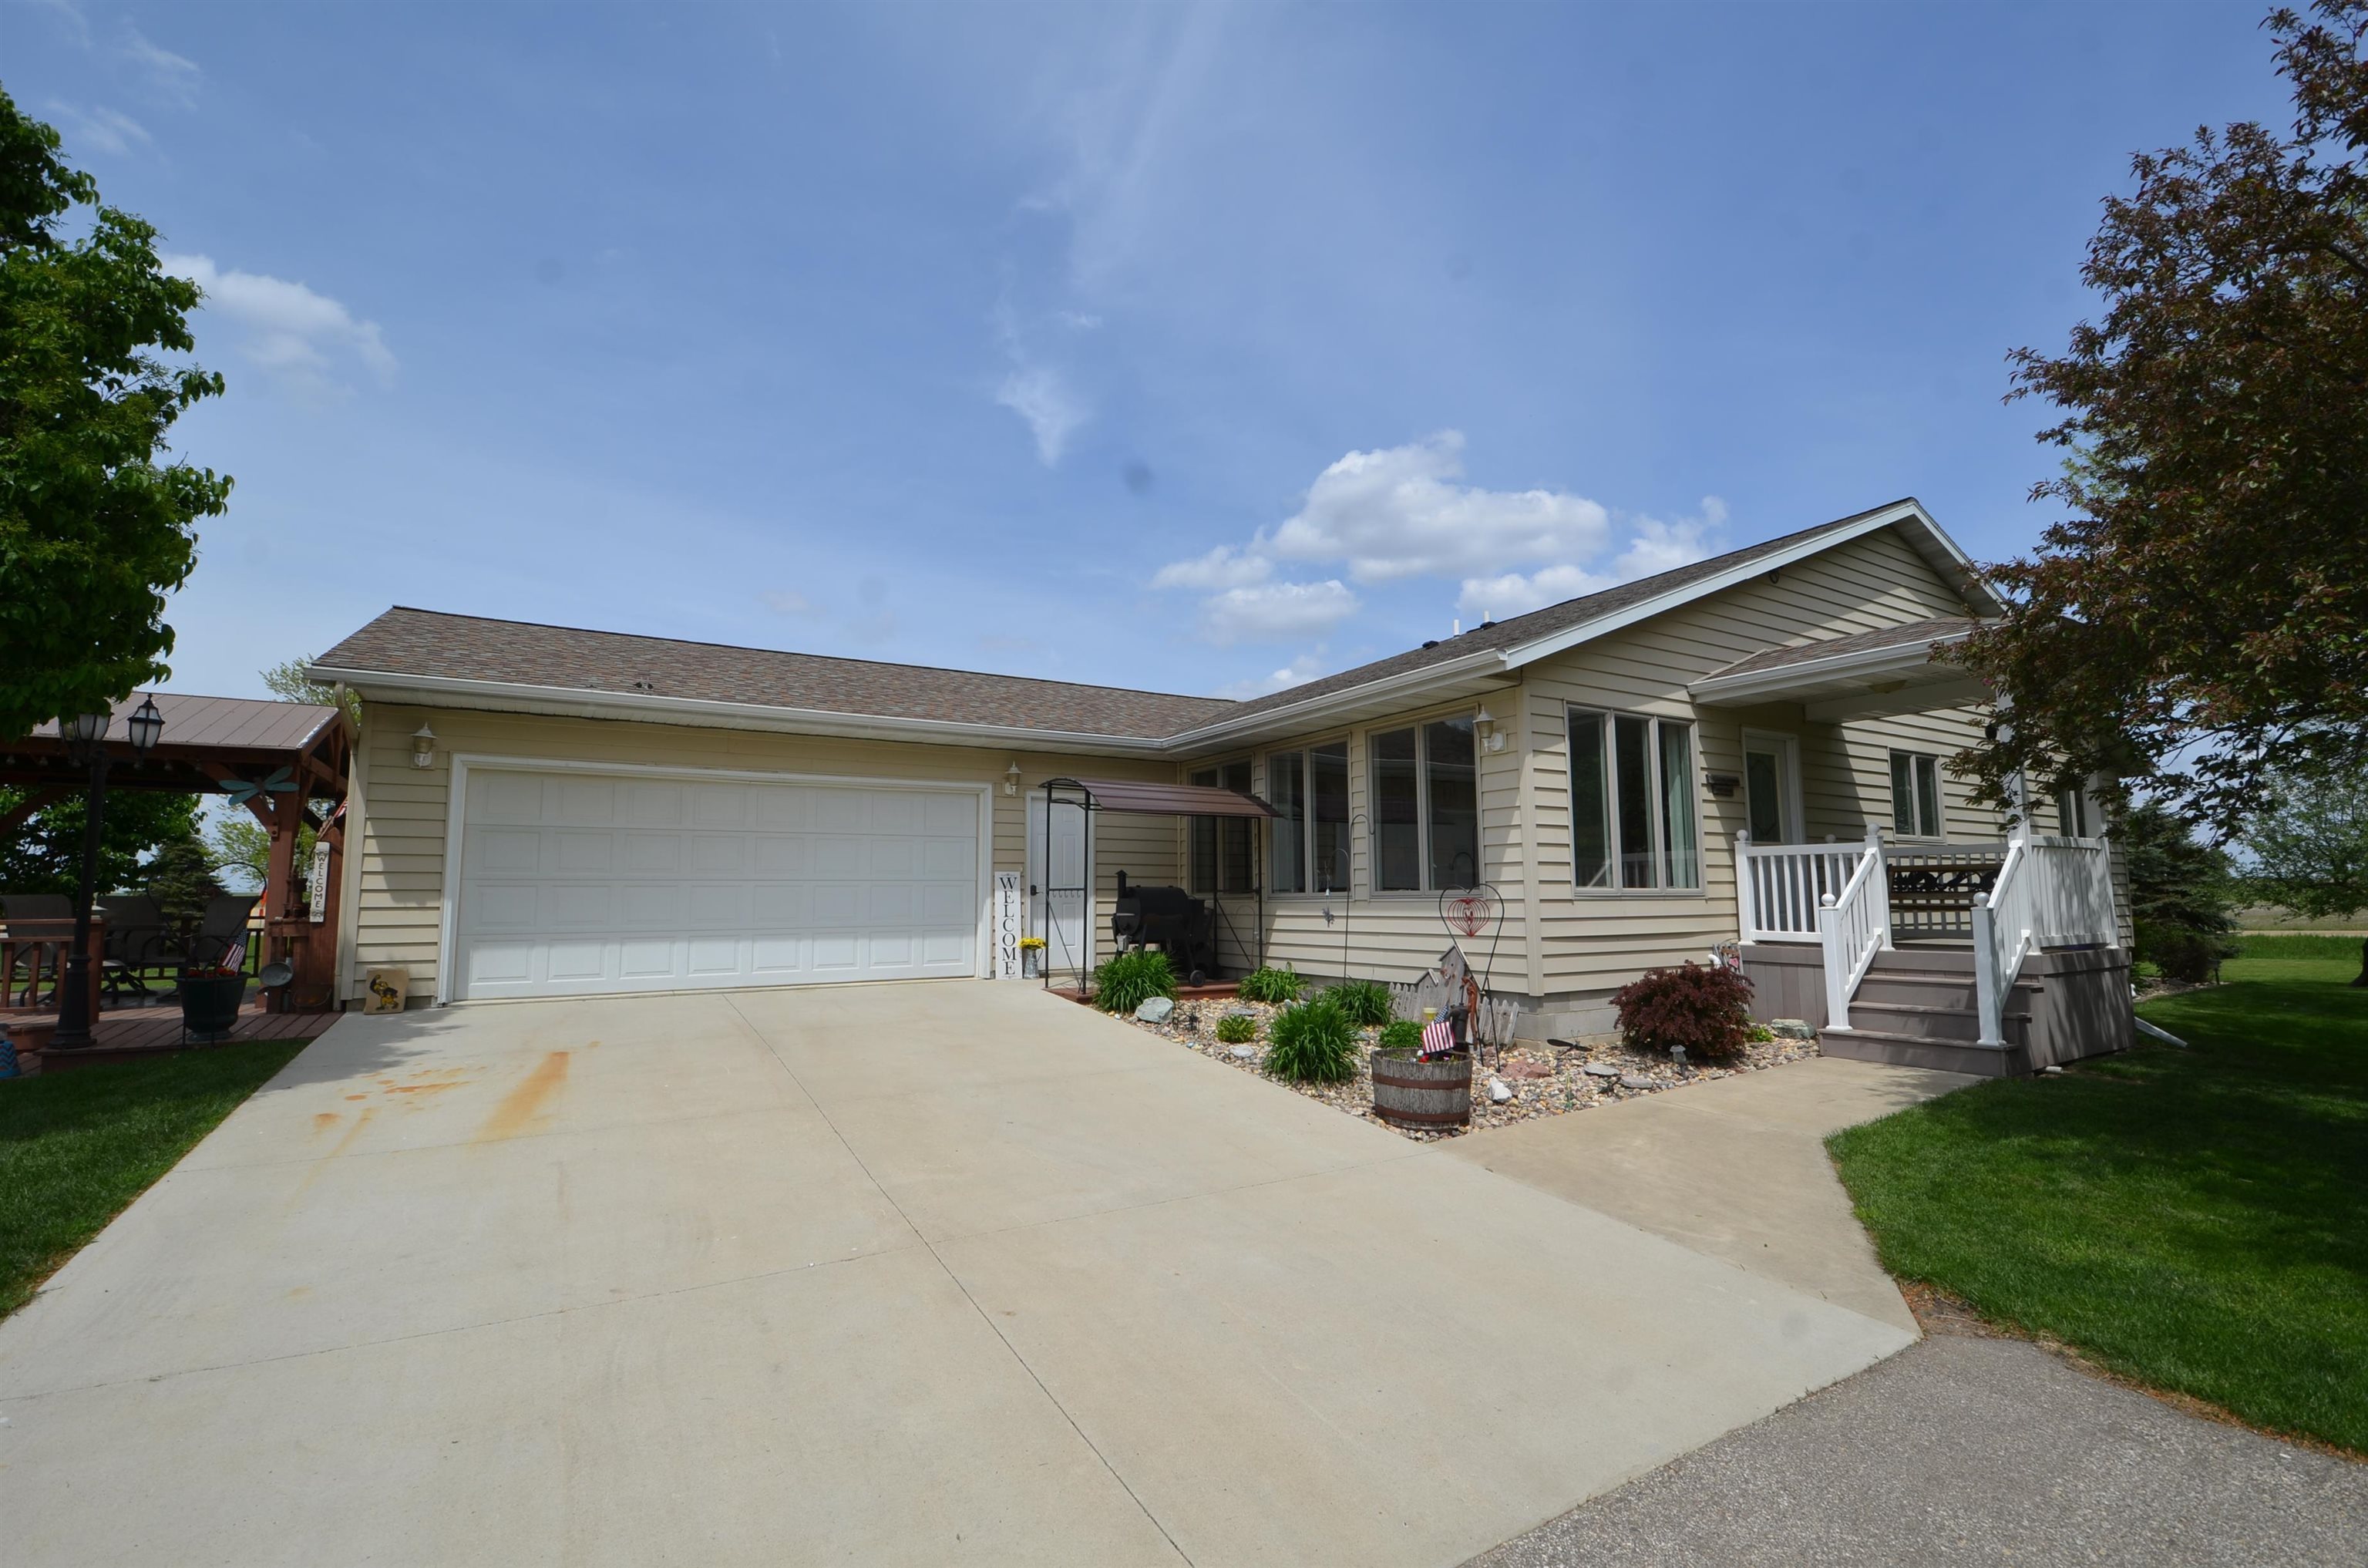 3605 300th Ave., Dickens, IA 51333 